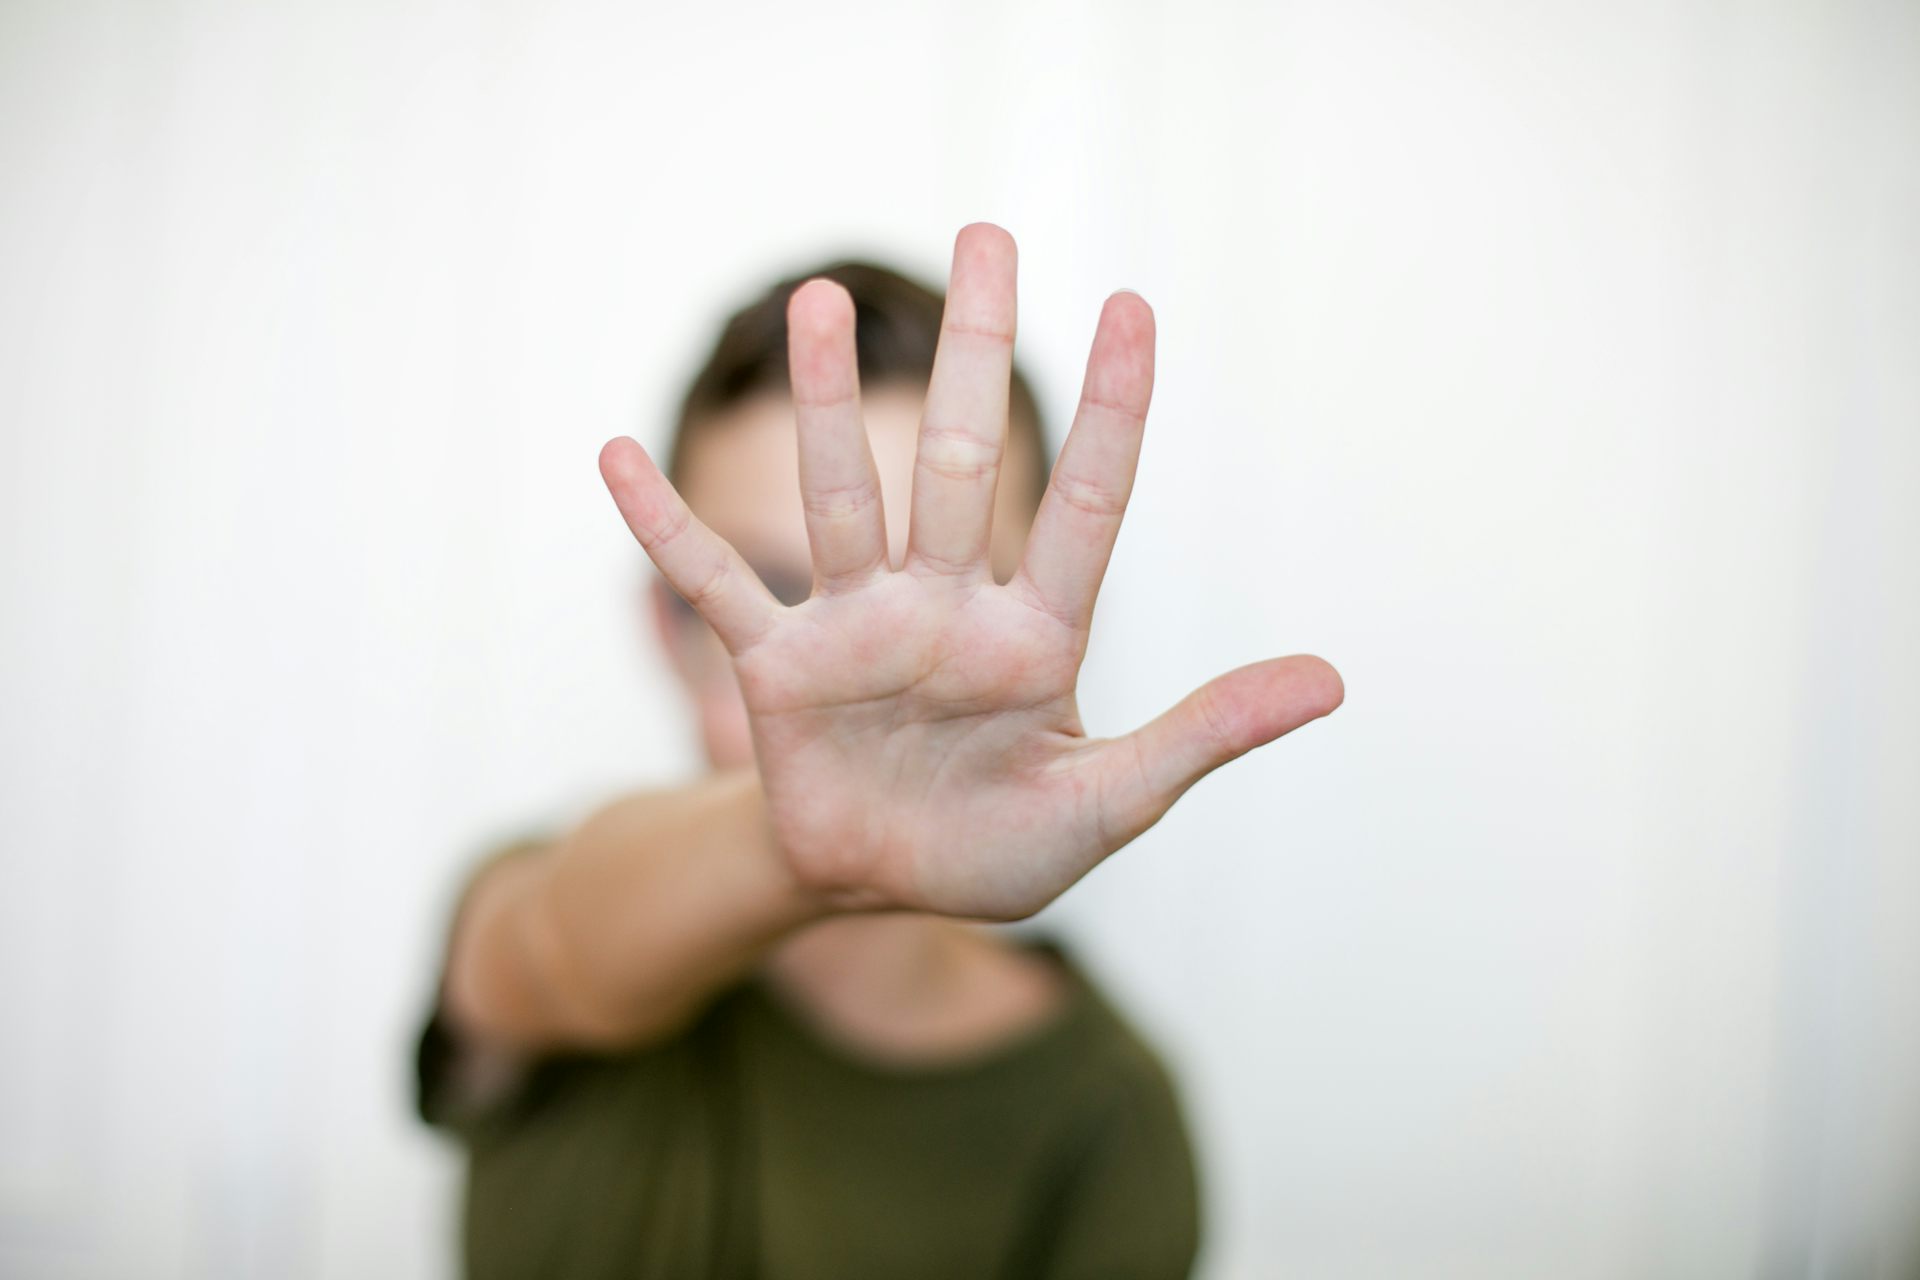 A person holding up their hand in front of their face